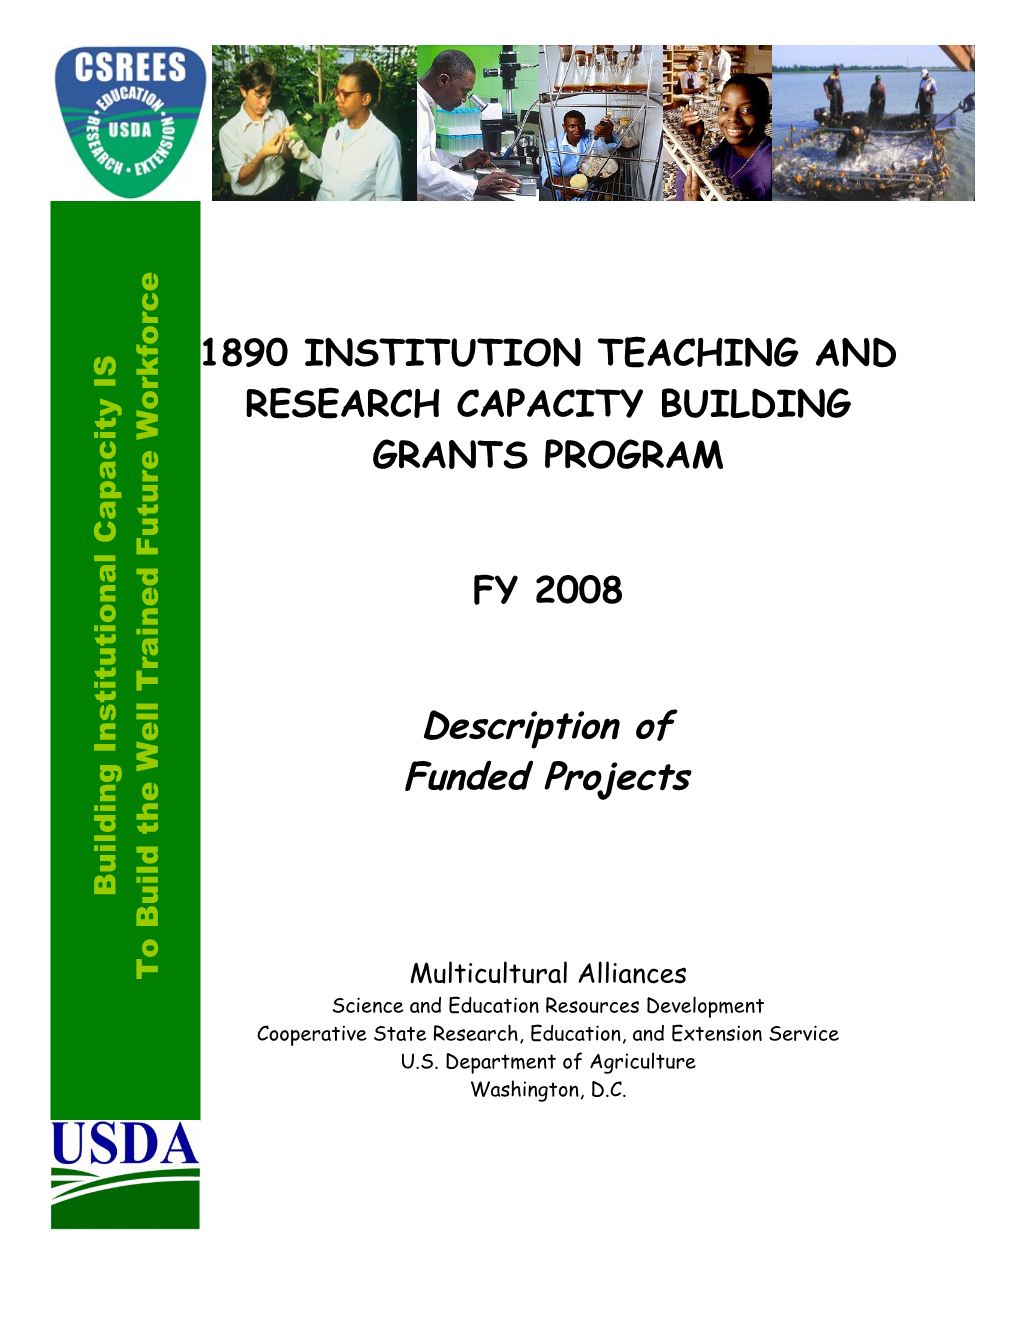 1890 Institution Teaching and Research Capacity Building Grants Program